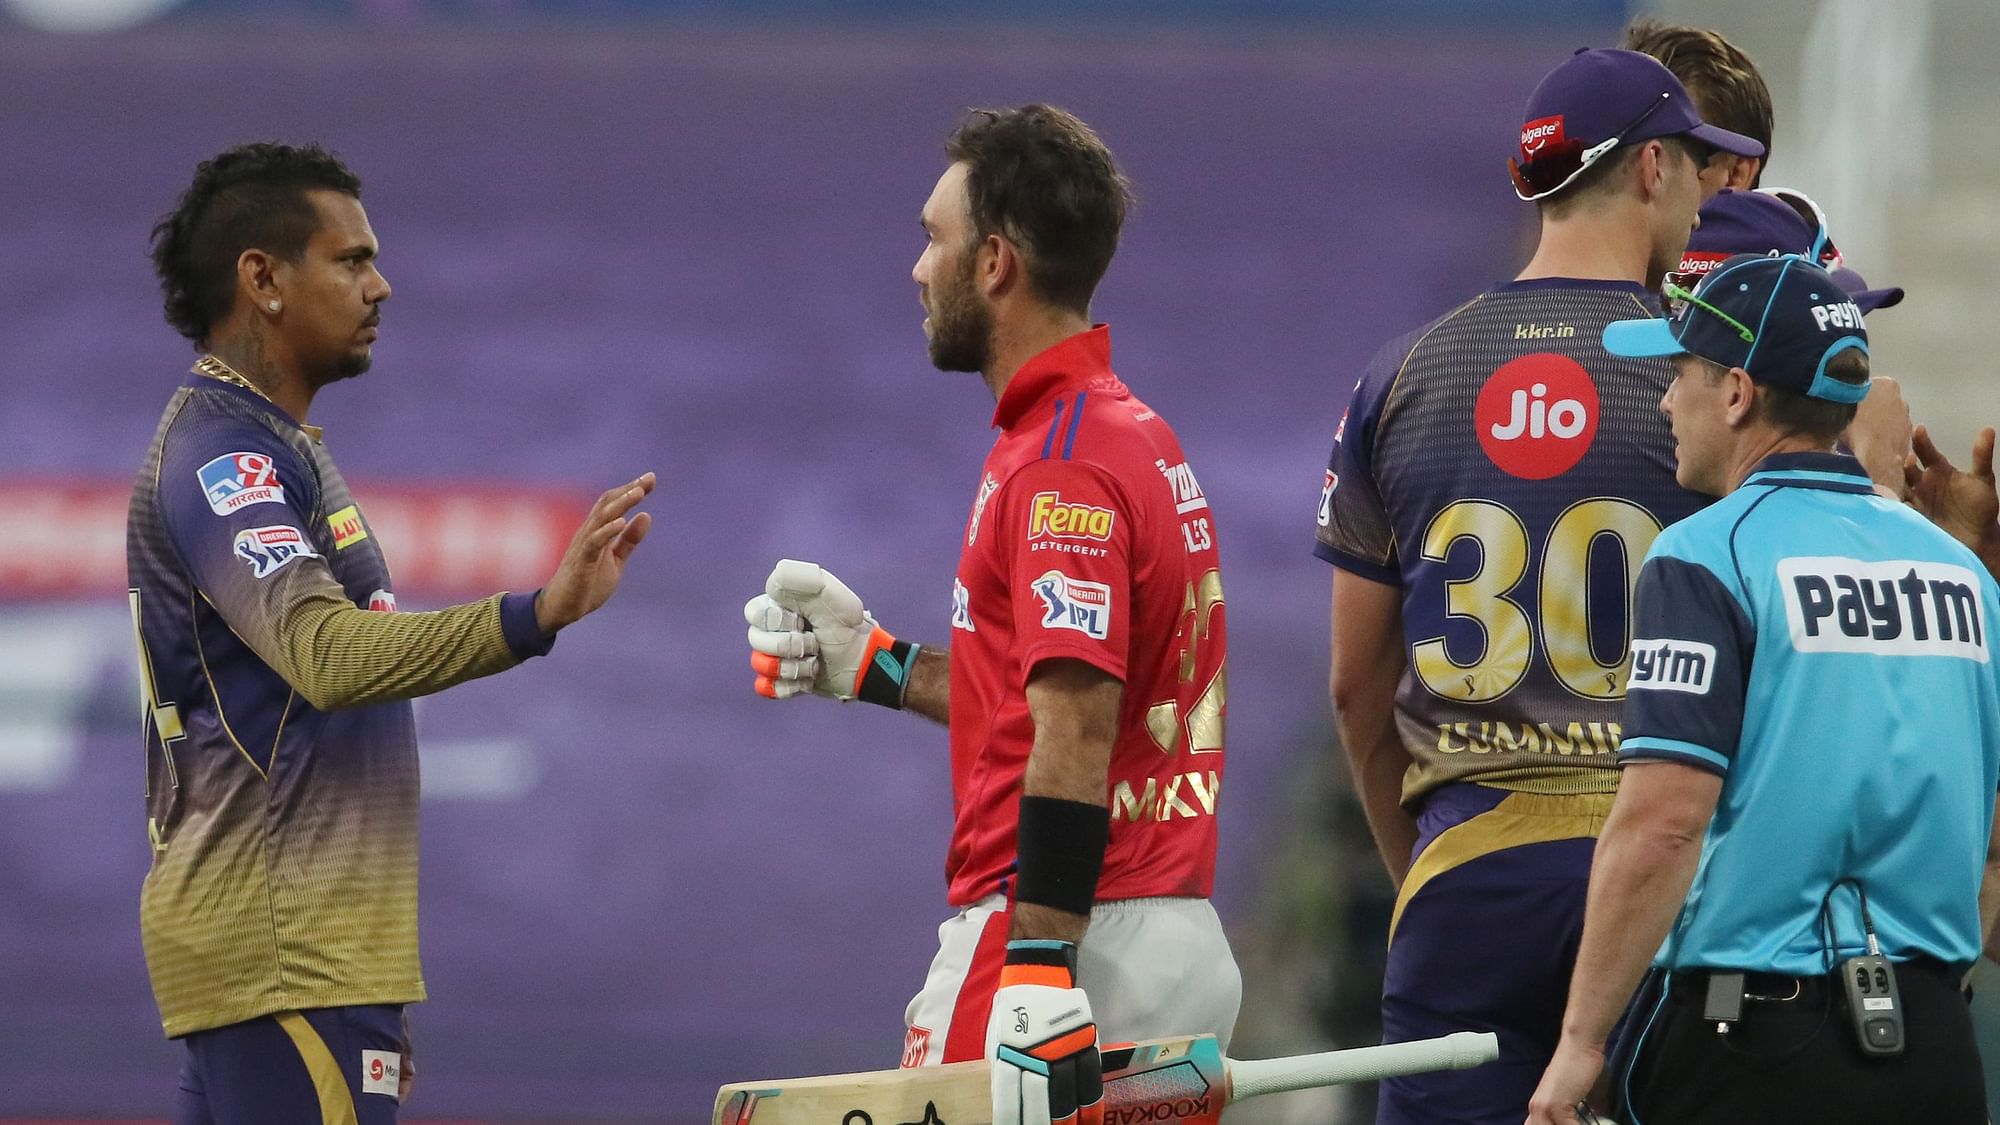 KKR beat KXIP by 2 runs in the Indian Premier League match on Saturday.